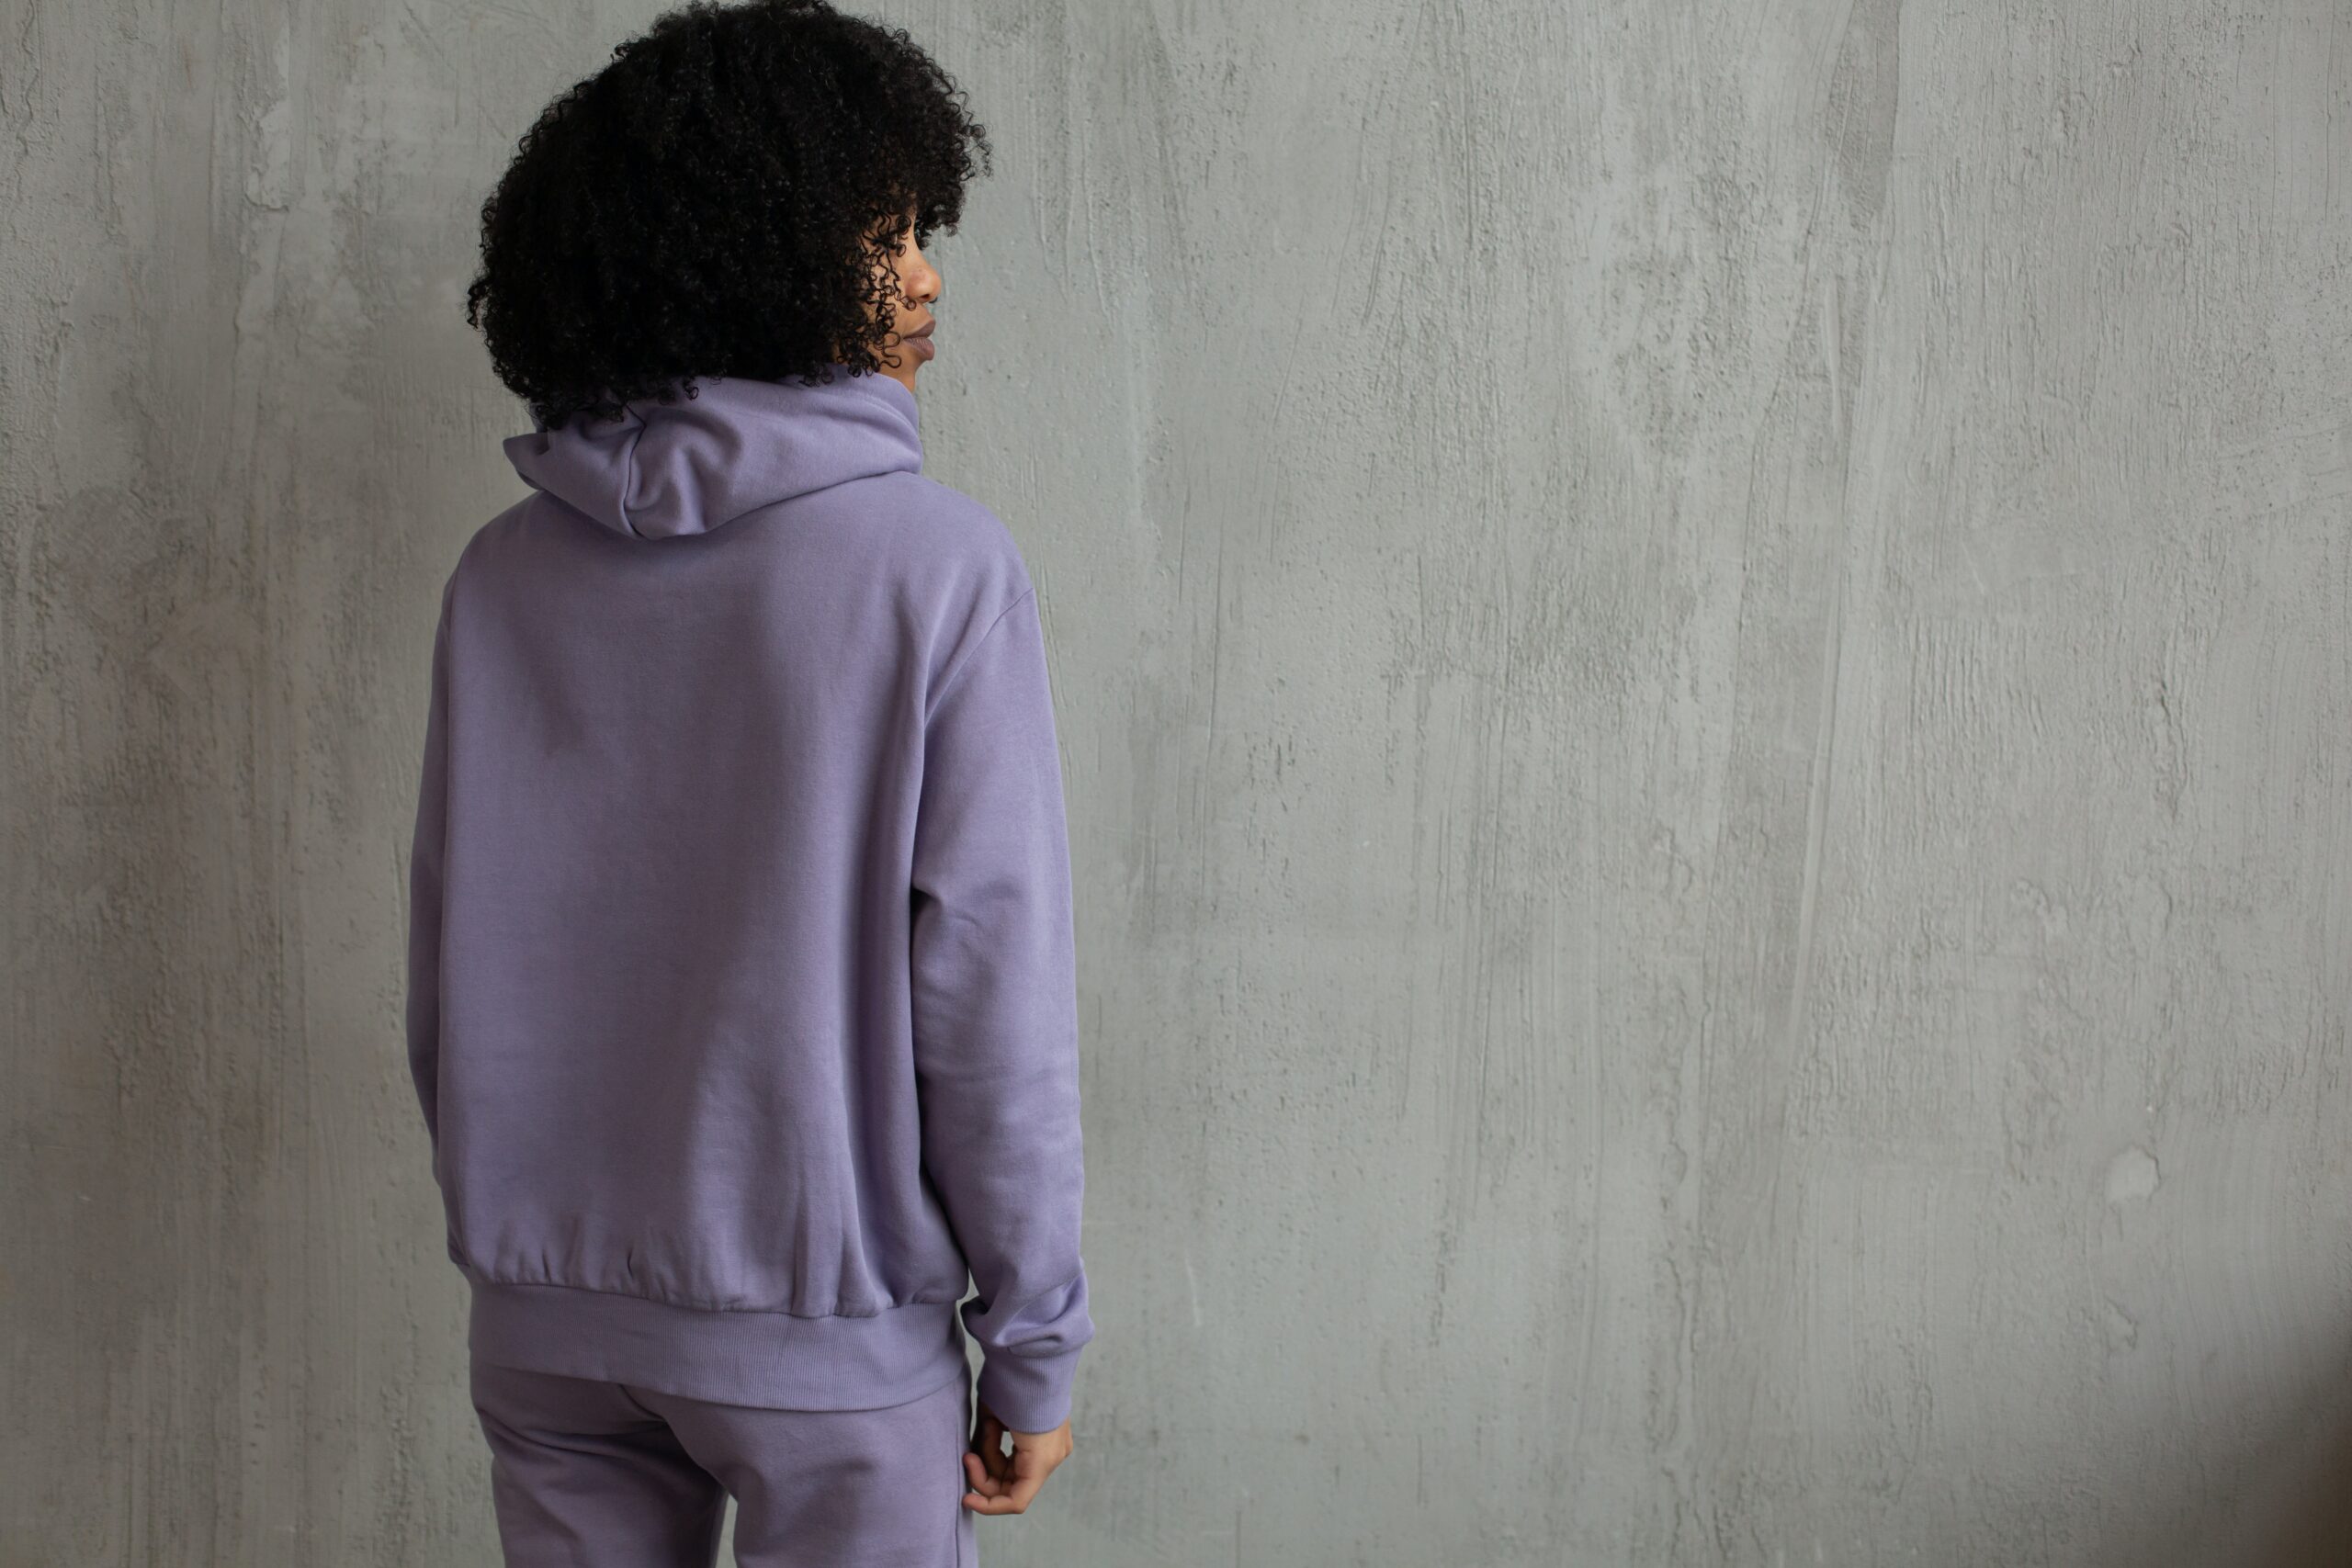 Women’s Tracksuits: Discover Tailored Styles, Cuts, and Colors for a Fashion-Forward Look!